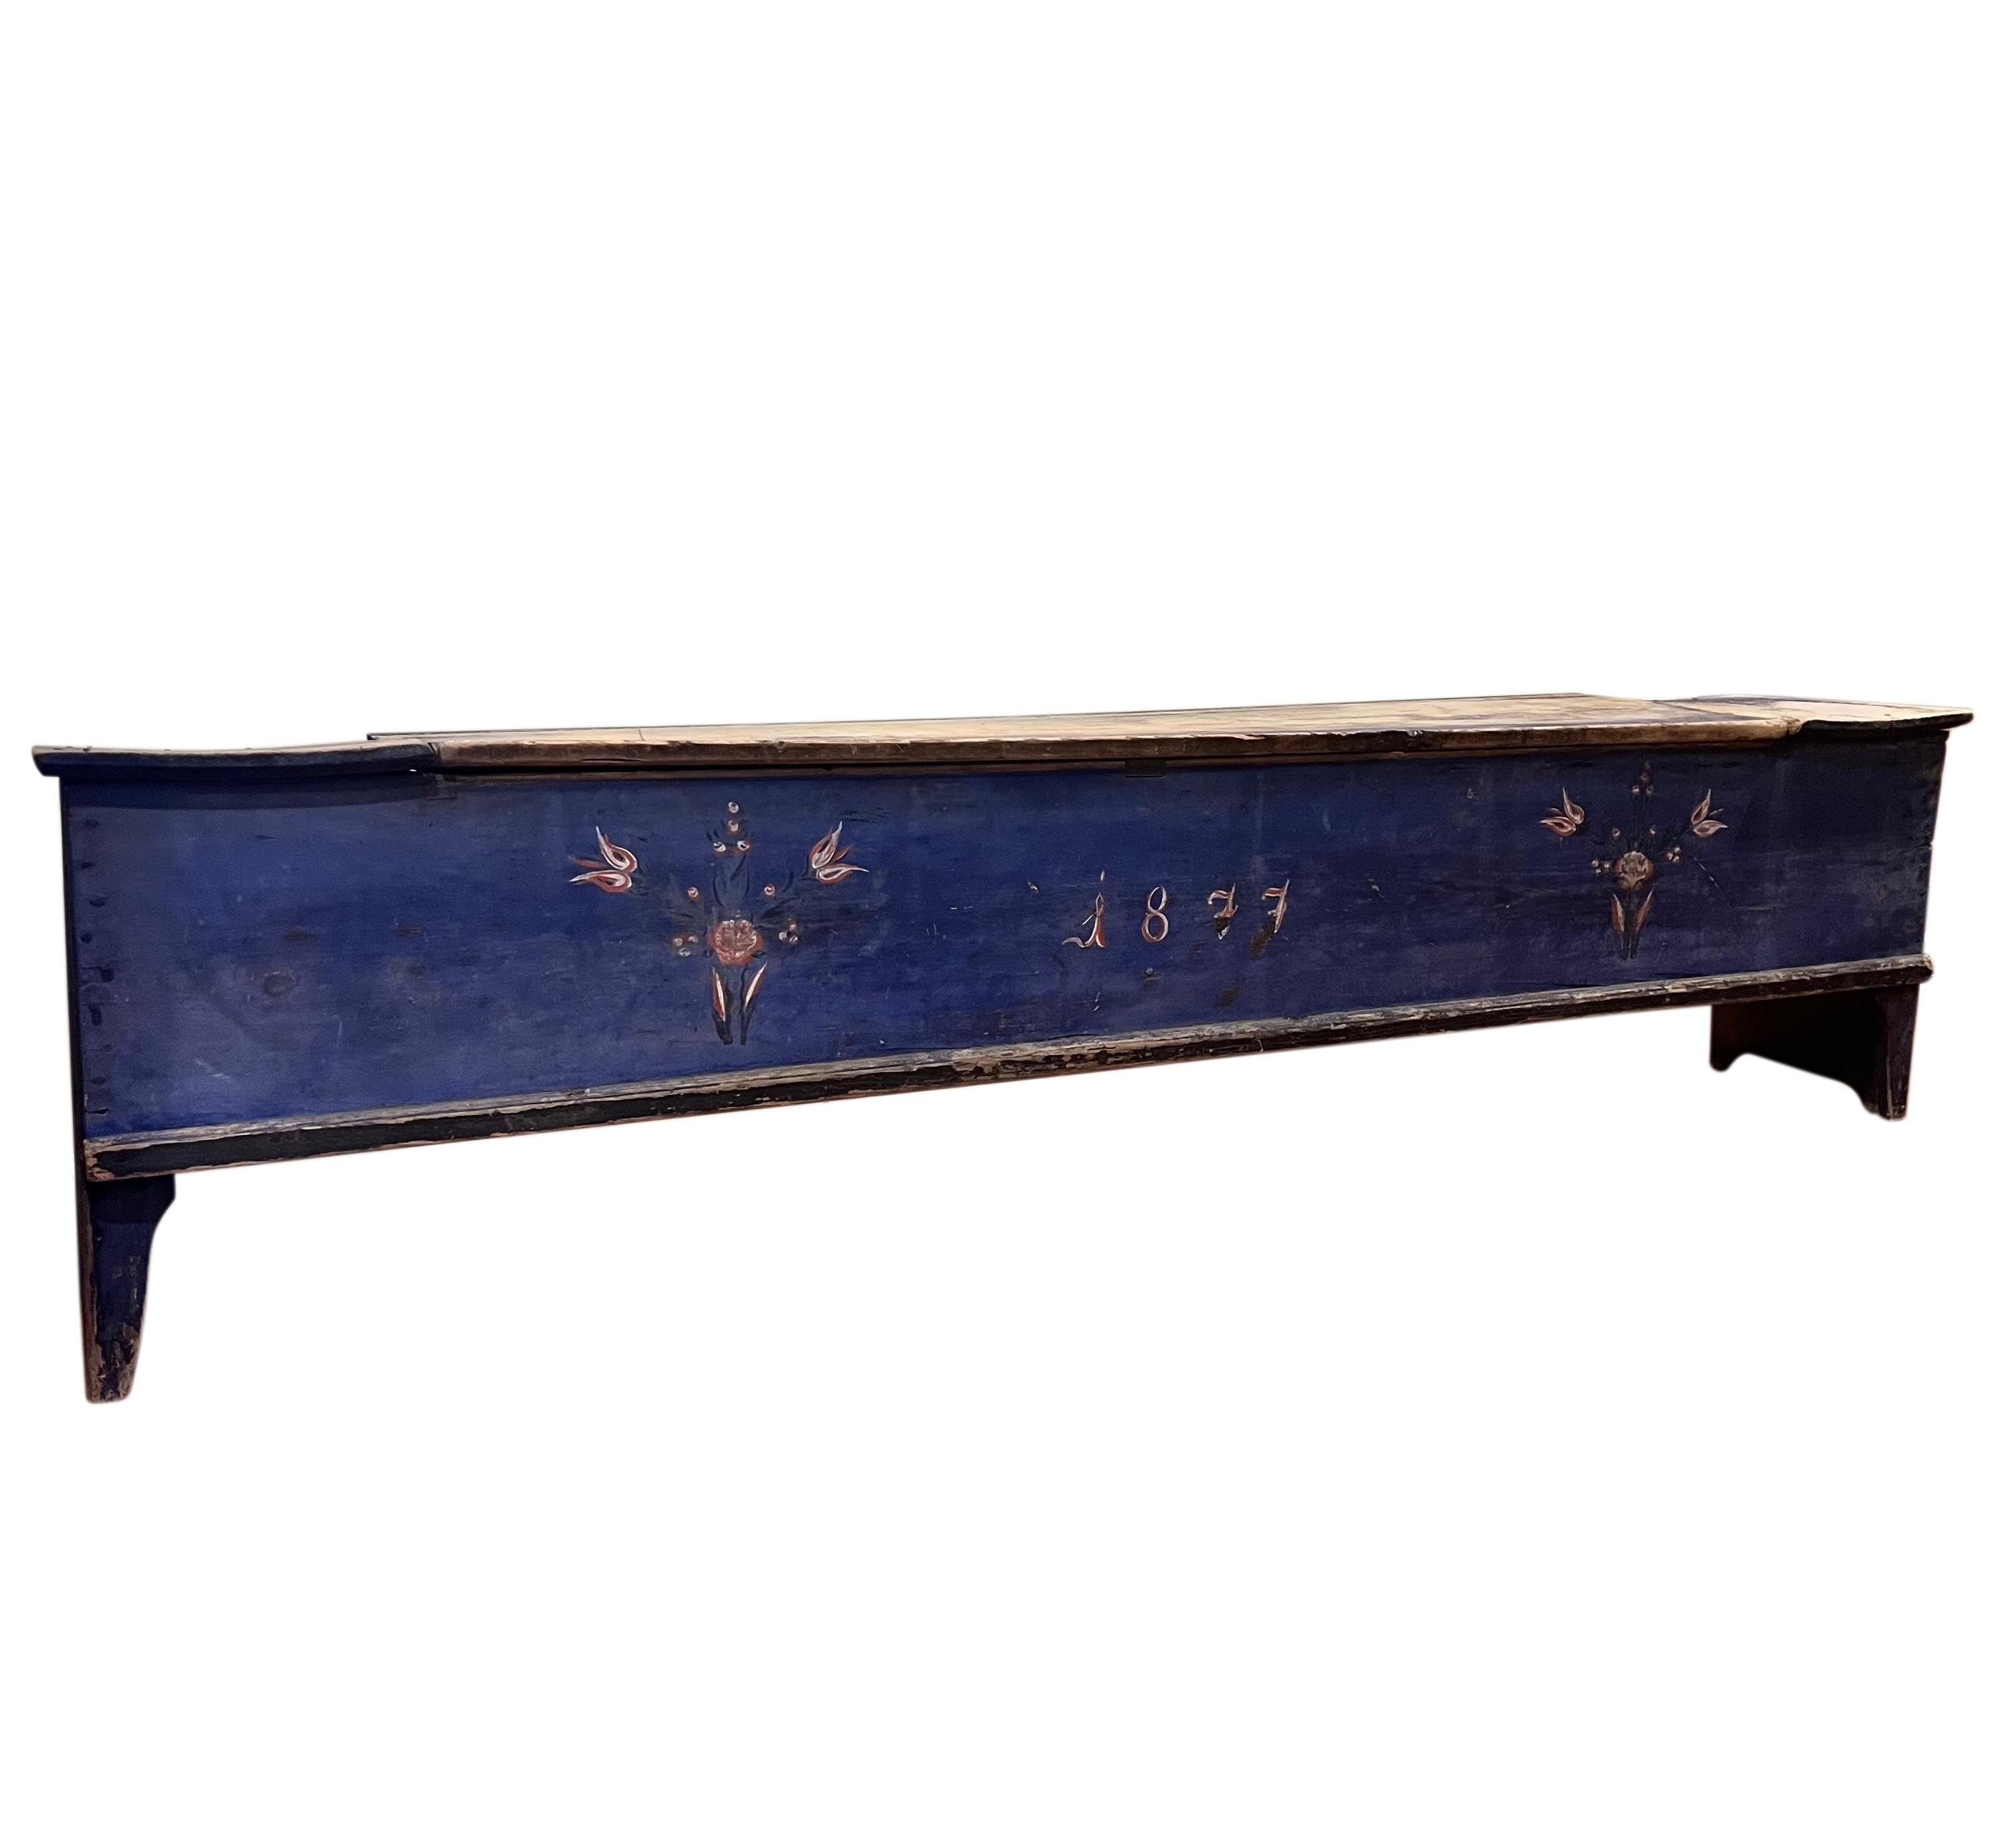 19th century Swedish folk art painted pine long chest or bench, dated 1877.

Great for both a bench and storage, it is long and narrow with a large divided section inside. The chest has age appropriate wear which adds to its character. The top is